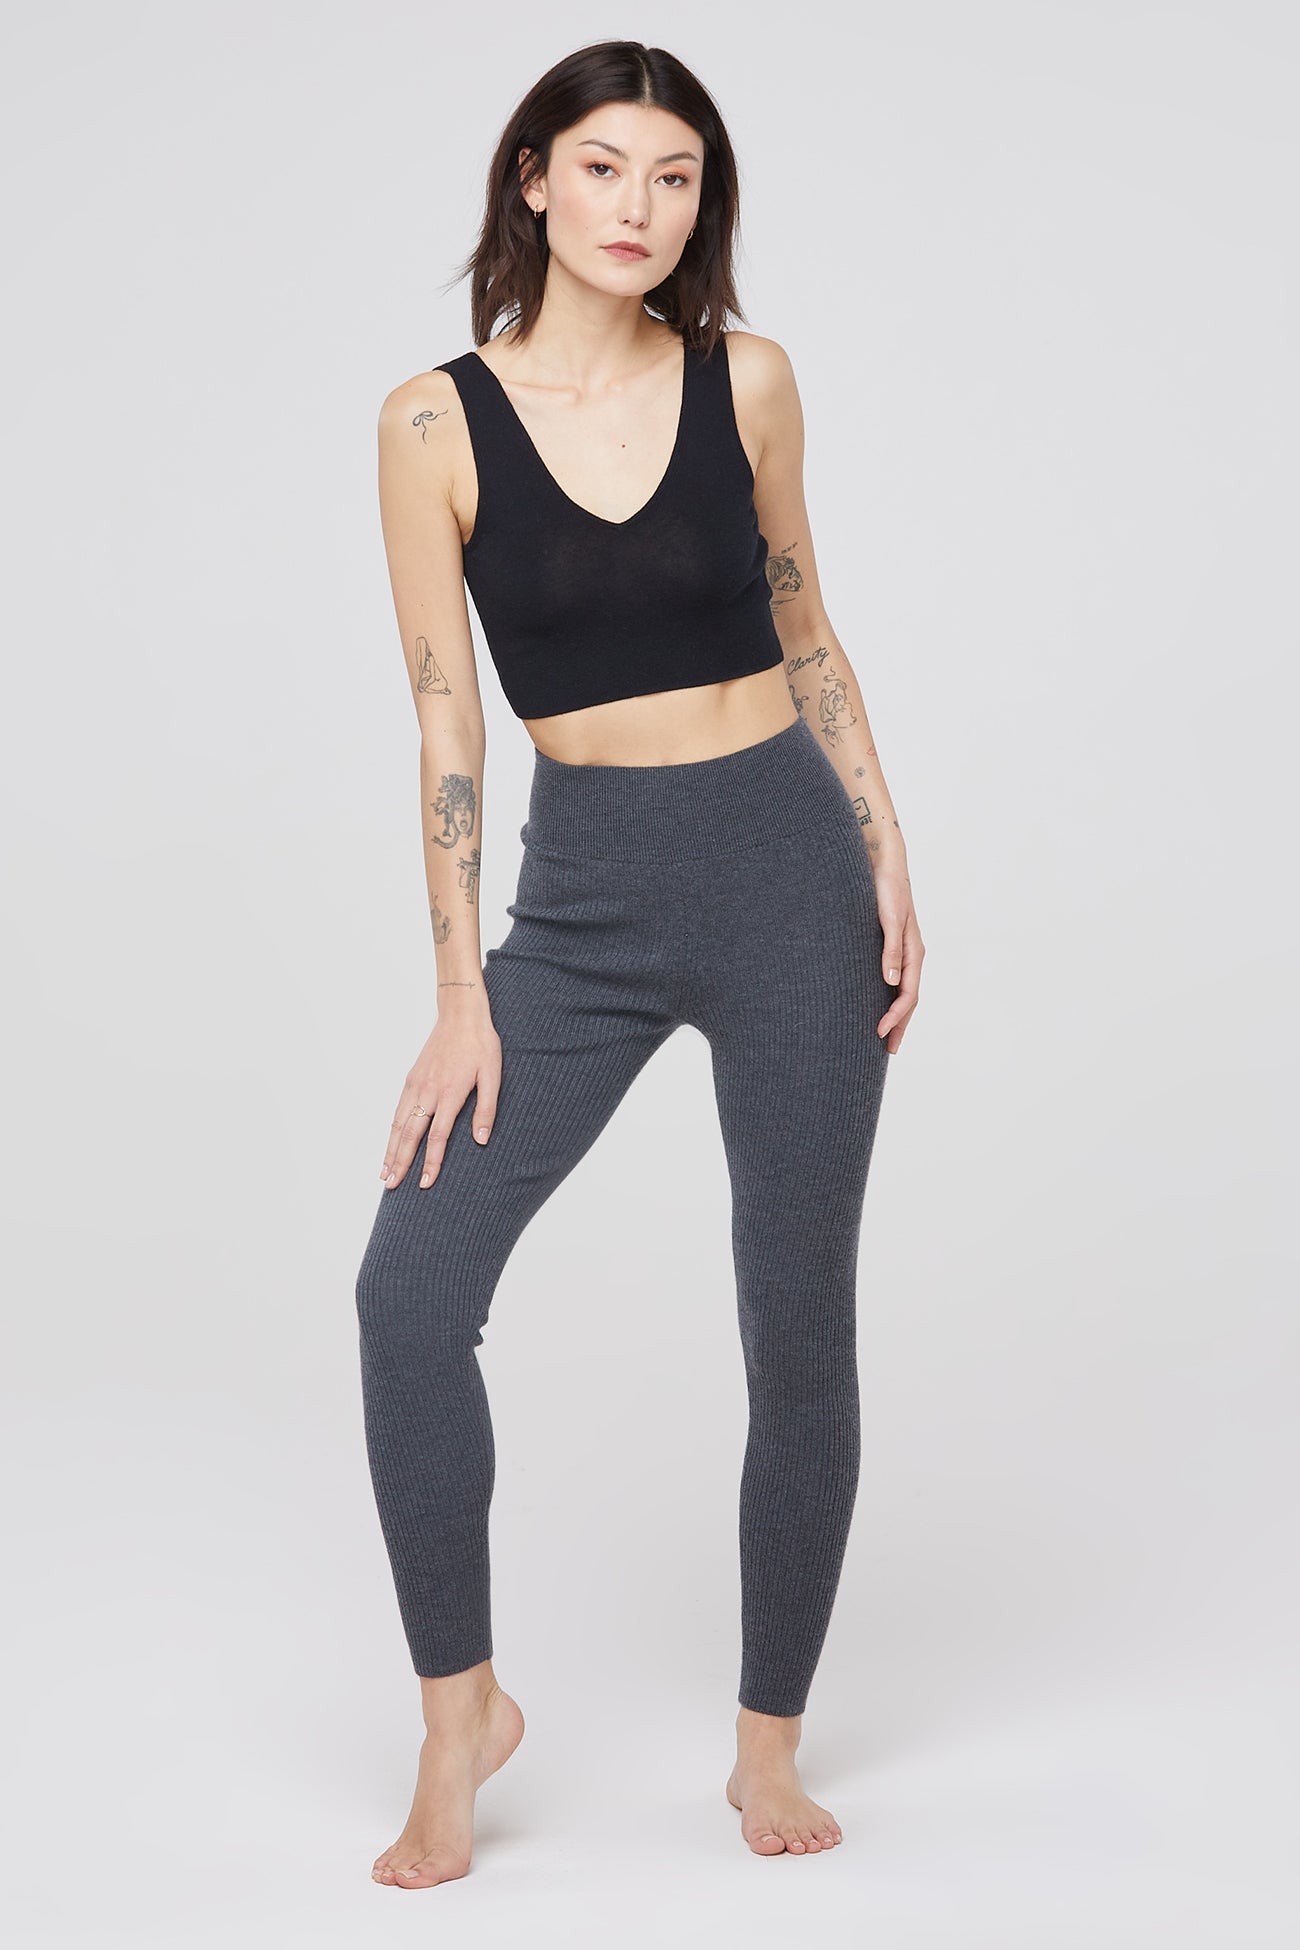 Cashmere - Leggings and jeans - Women